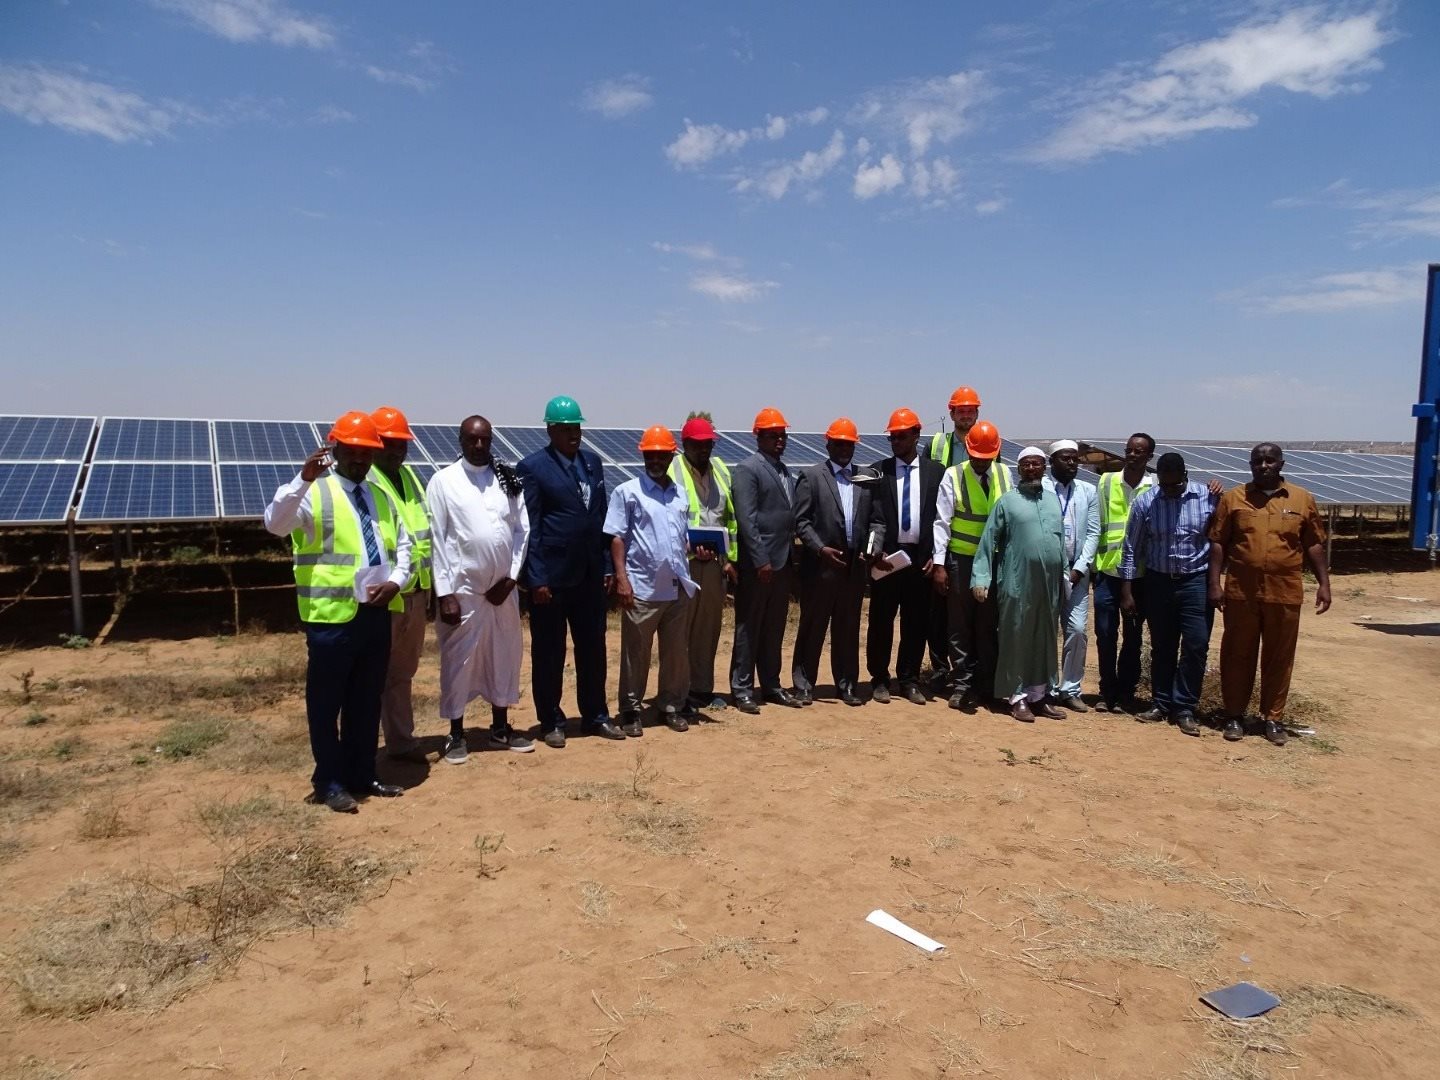 The ESRES team stand near solar panels in Somaliland